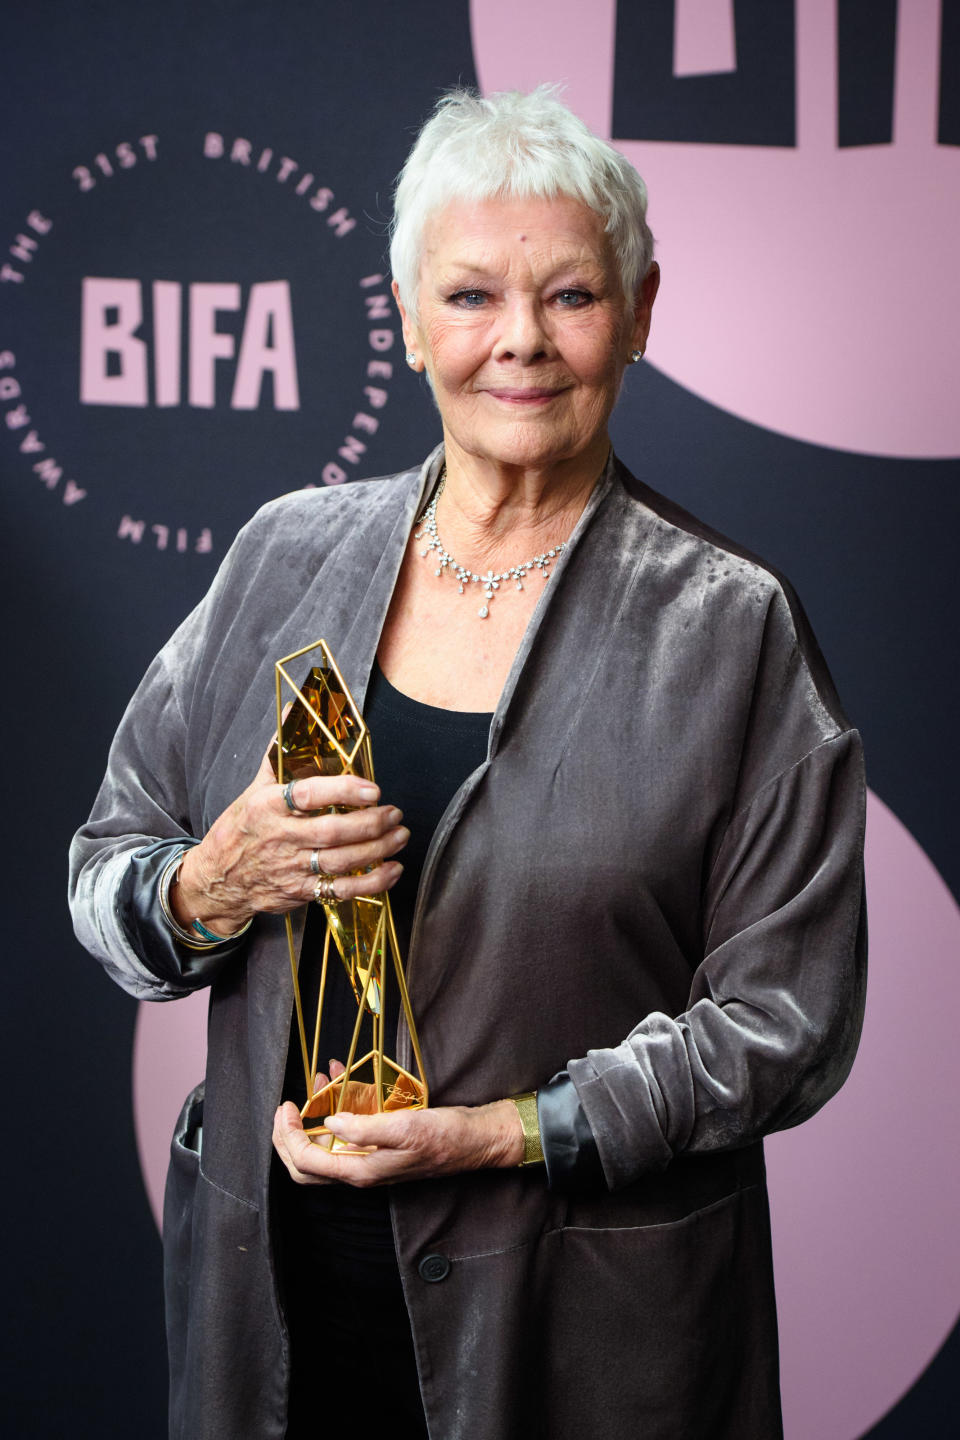 Dame Judi Dench with the Richard Harris Award for Outstanding Contribution by an actor to British Film, during the twenty-first British Independent Film Awards, held at Old Billingsgate, London.